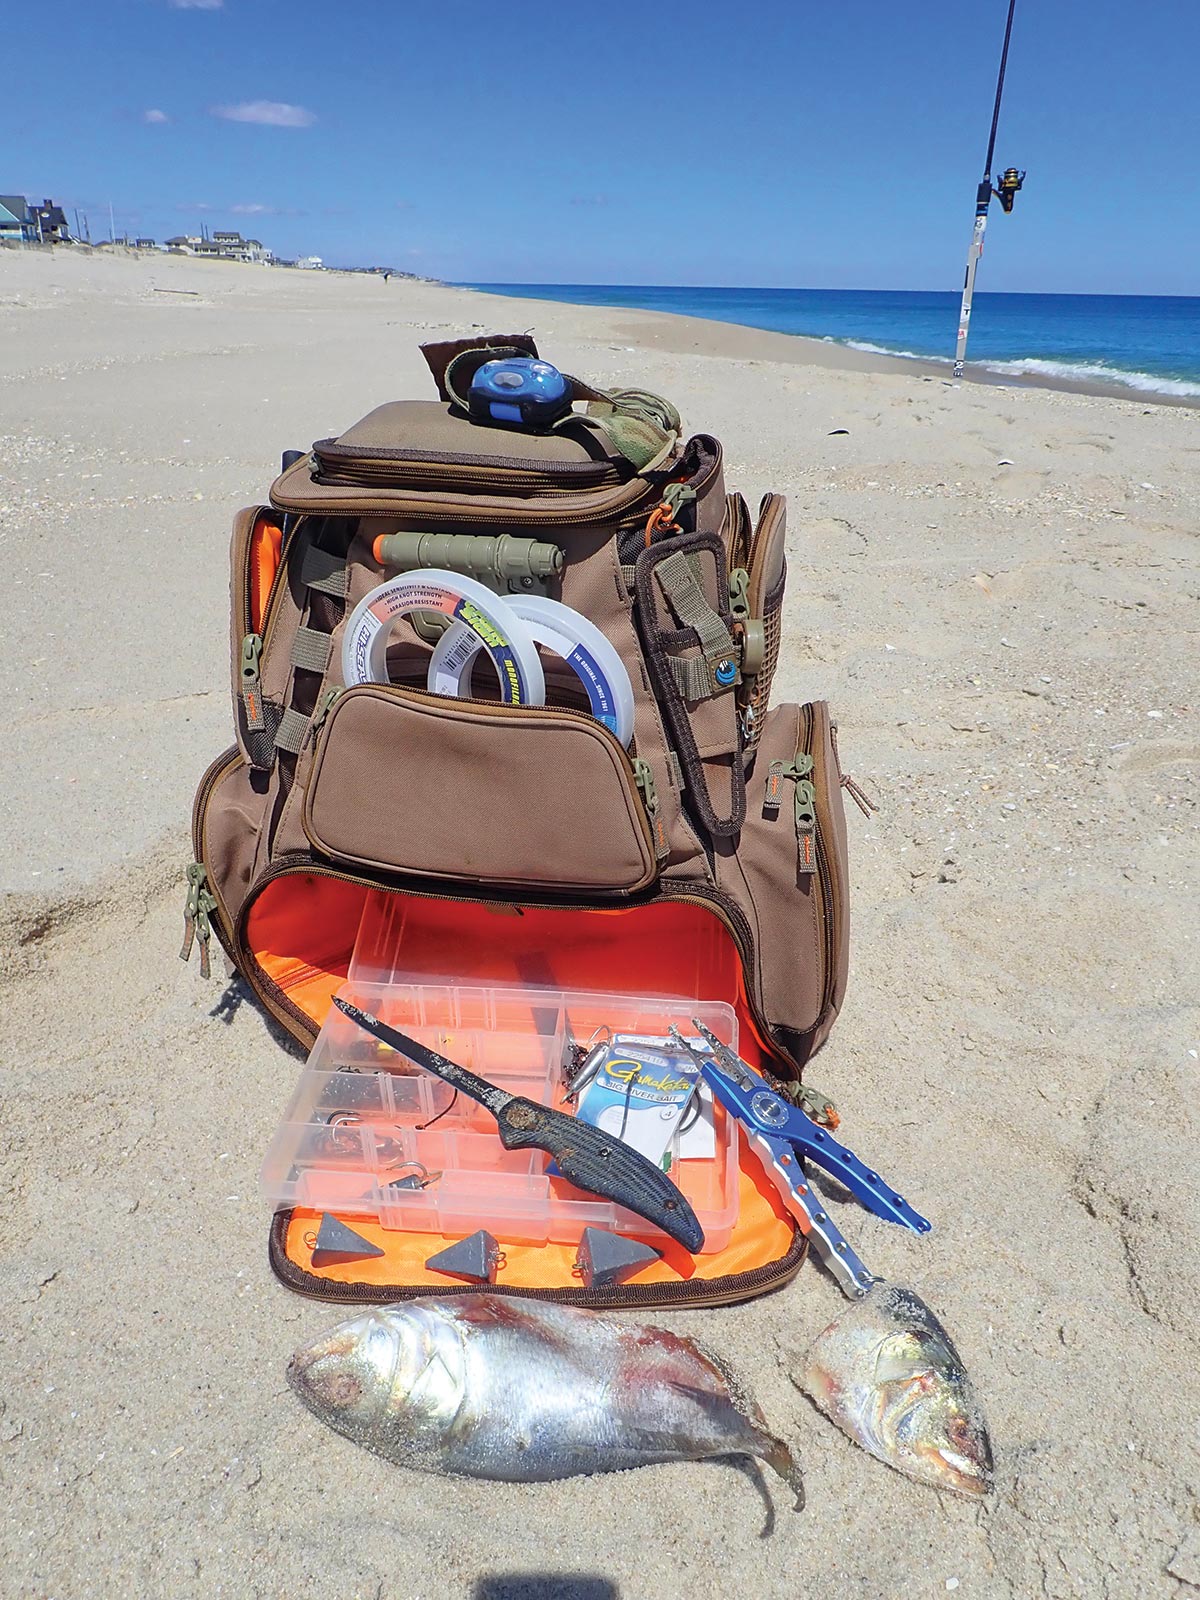 Gear bag carrying everything you need for summer surf chunking